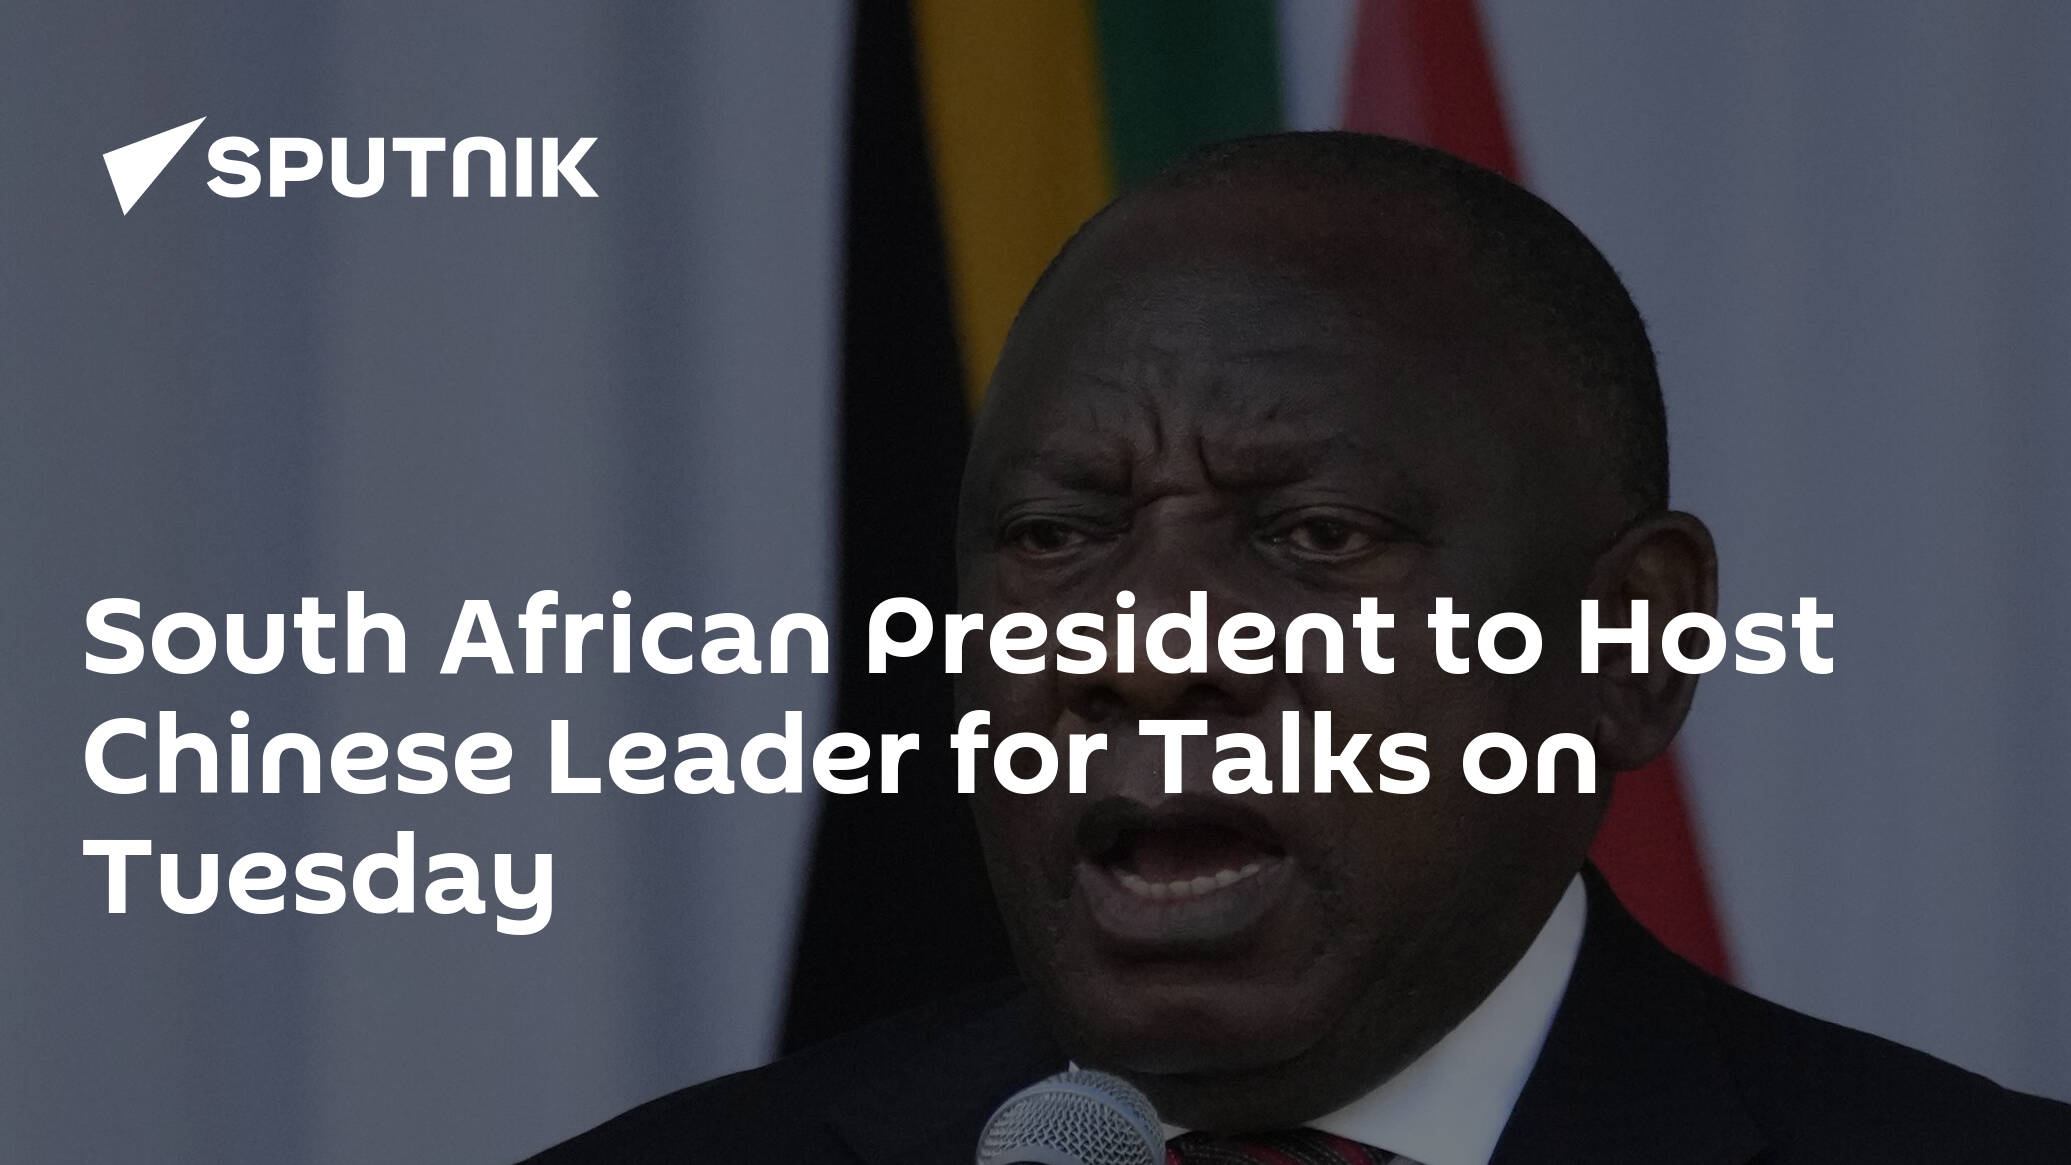 South African President to Host Chinese Leader for Talks on Tuesday